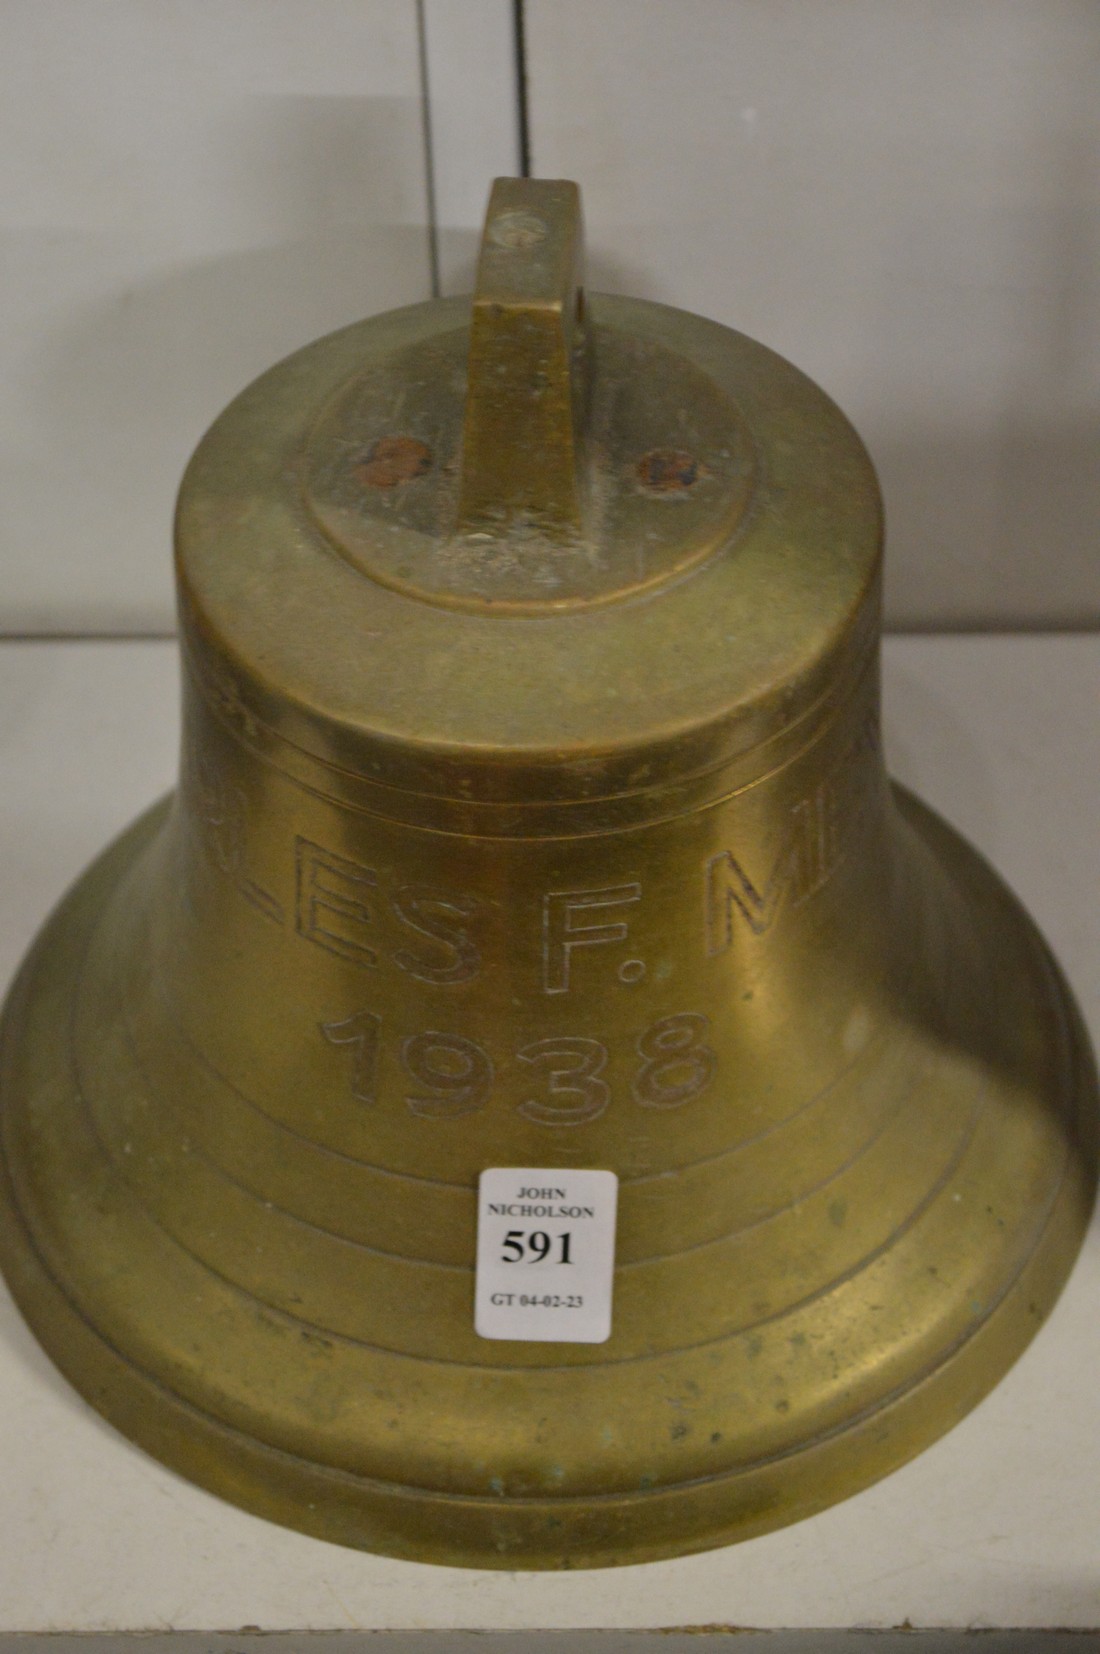 A bronze bell engraved Charles F Meyer 1938.